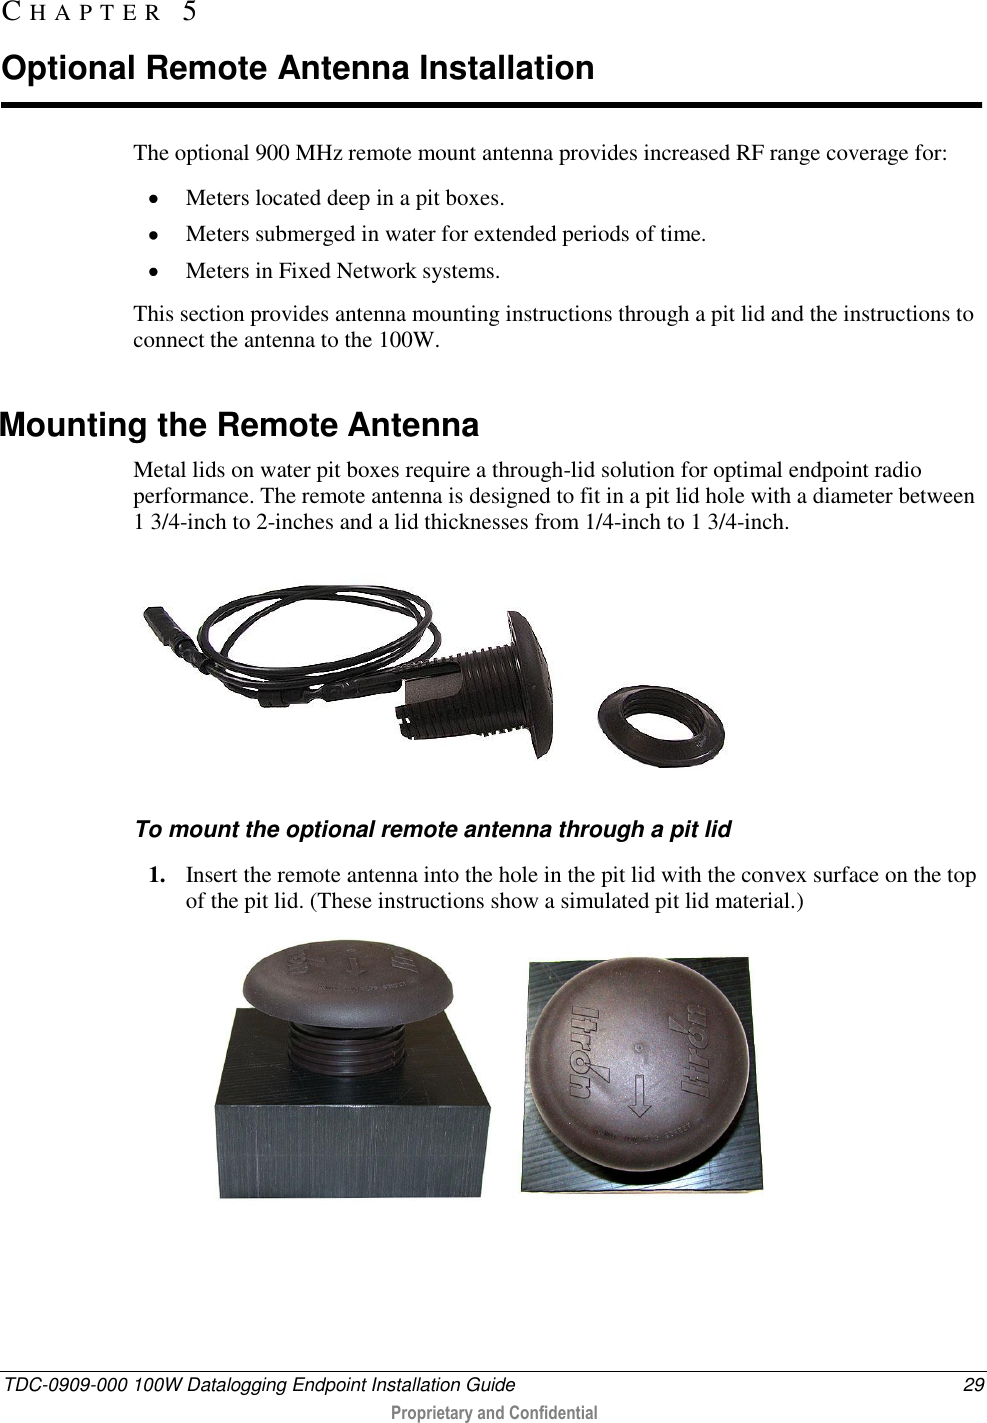  TDC-0909-000 100W Datalogging Endpoint Installation Guide  29  Proprietary and Confidential  The optional 900 MHz remote mount antenna provides increased RF range coverage for:  Meters located deep in a pit boxes.  Meters submerged in water for extended periods of time.   Meters in Fixed Network systems. This section provides antenna mounting instructions through a pit lid and the instructions to connect the antenna to the 100W.  Mounting the Remote Antenna Metal lids on water pit boxes require a through-lid solution for optimal endpoint radio performance. The remote antenna is designed to fit in a pit lid hole with a diameter between 1 3/4-inch to 2-inches and a lid thicknesses from 1/4-inch to 1 3/4-inch.  To mount the optional remote antenna through a pit lid 1. Insert the remote antenna into the hole in the pit lid with the convex surface on the top of the pit lid. (These instructions show a simulated pit lid material.)   CH A P T E R   5  Optional Remote Antenna Installation 